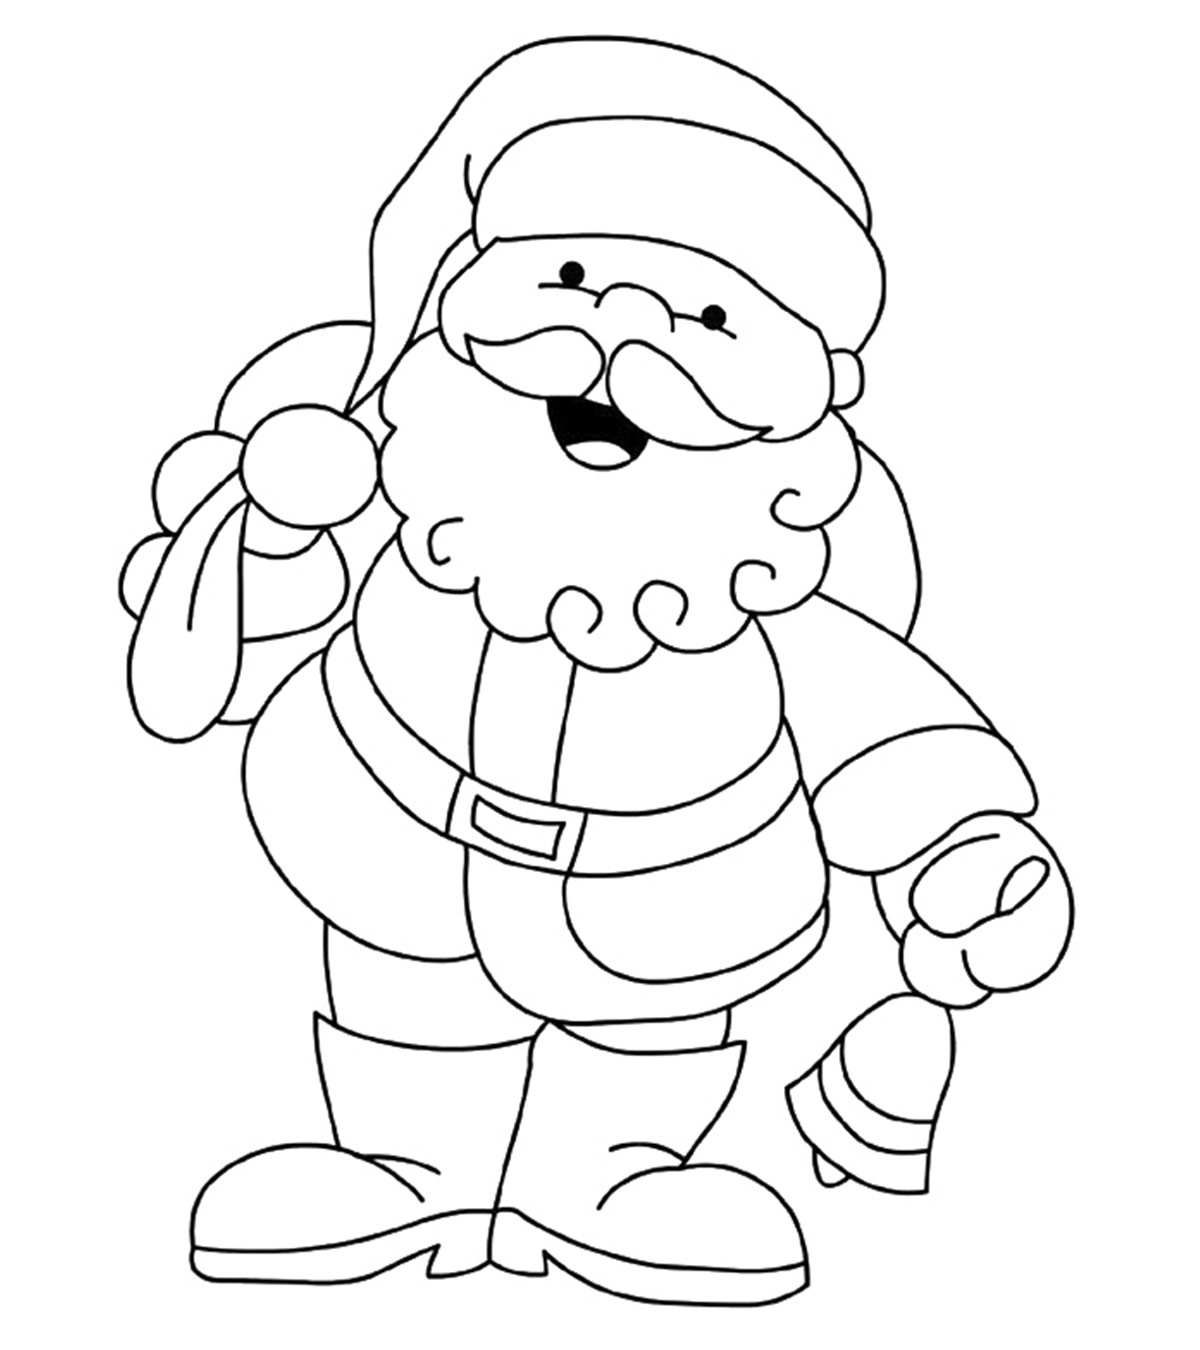 10 Best Christmas Ornament Coloring Pages Your Toddler Will Love To Color